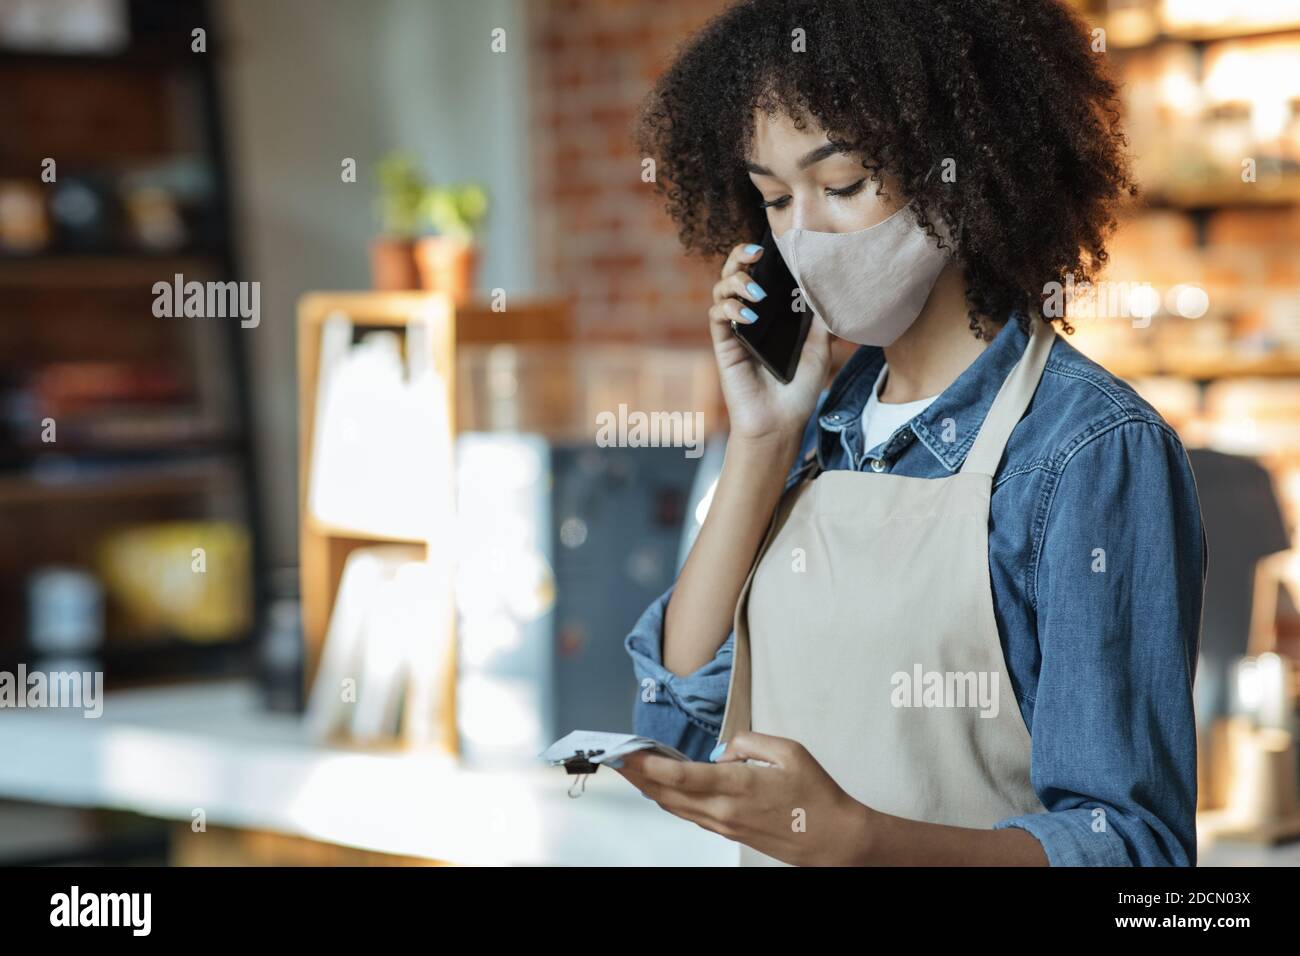 Small business owner decides to financial problems Stock Photo